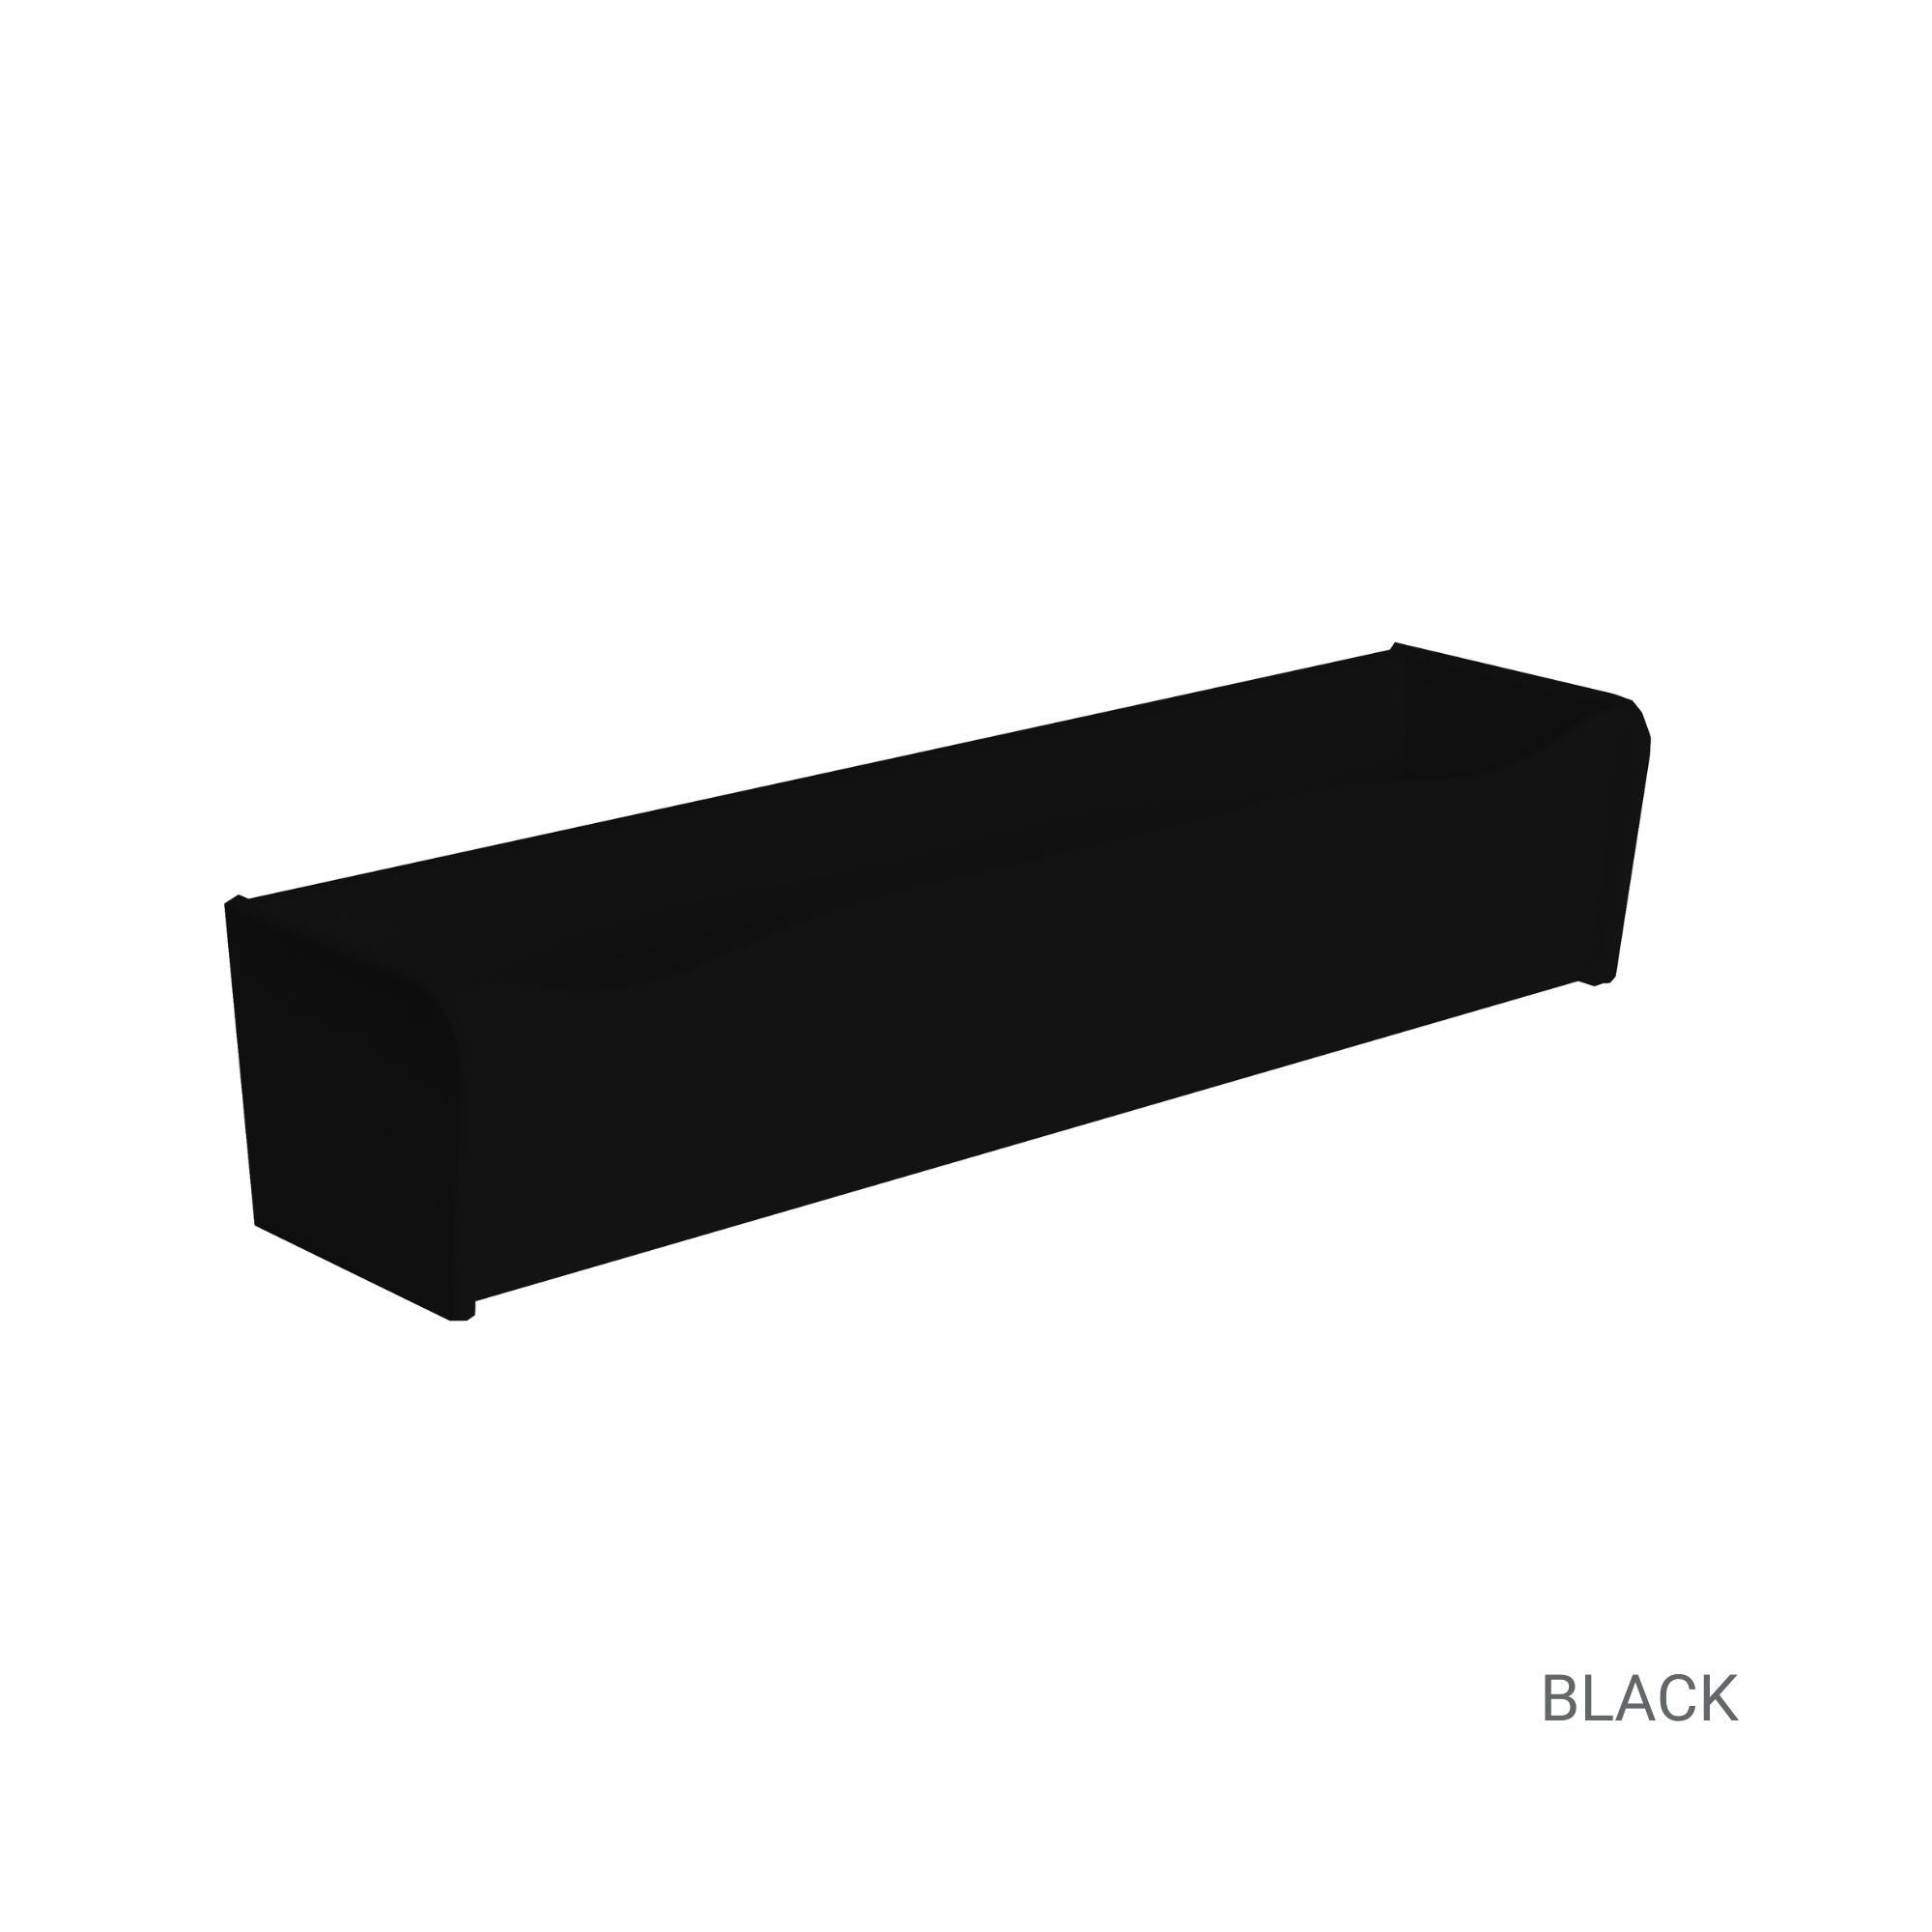 24" x 6" x 5" Black Flower Box for Window Sills, Sheds, Playhouses, and MORE